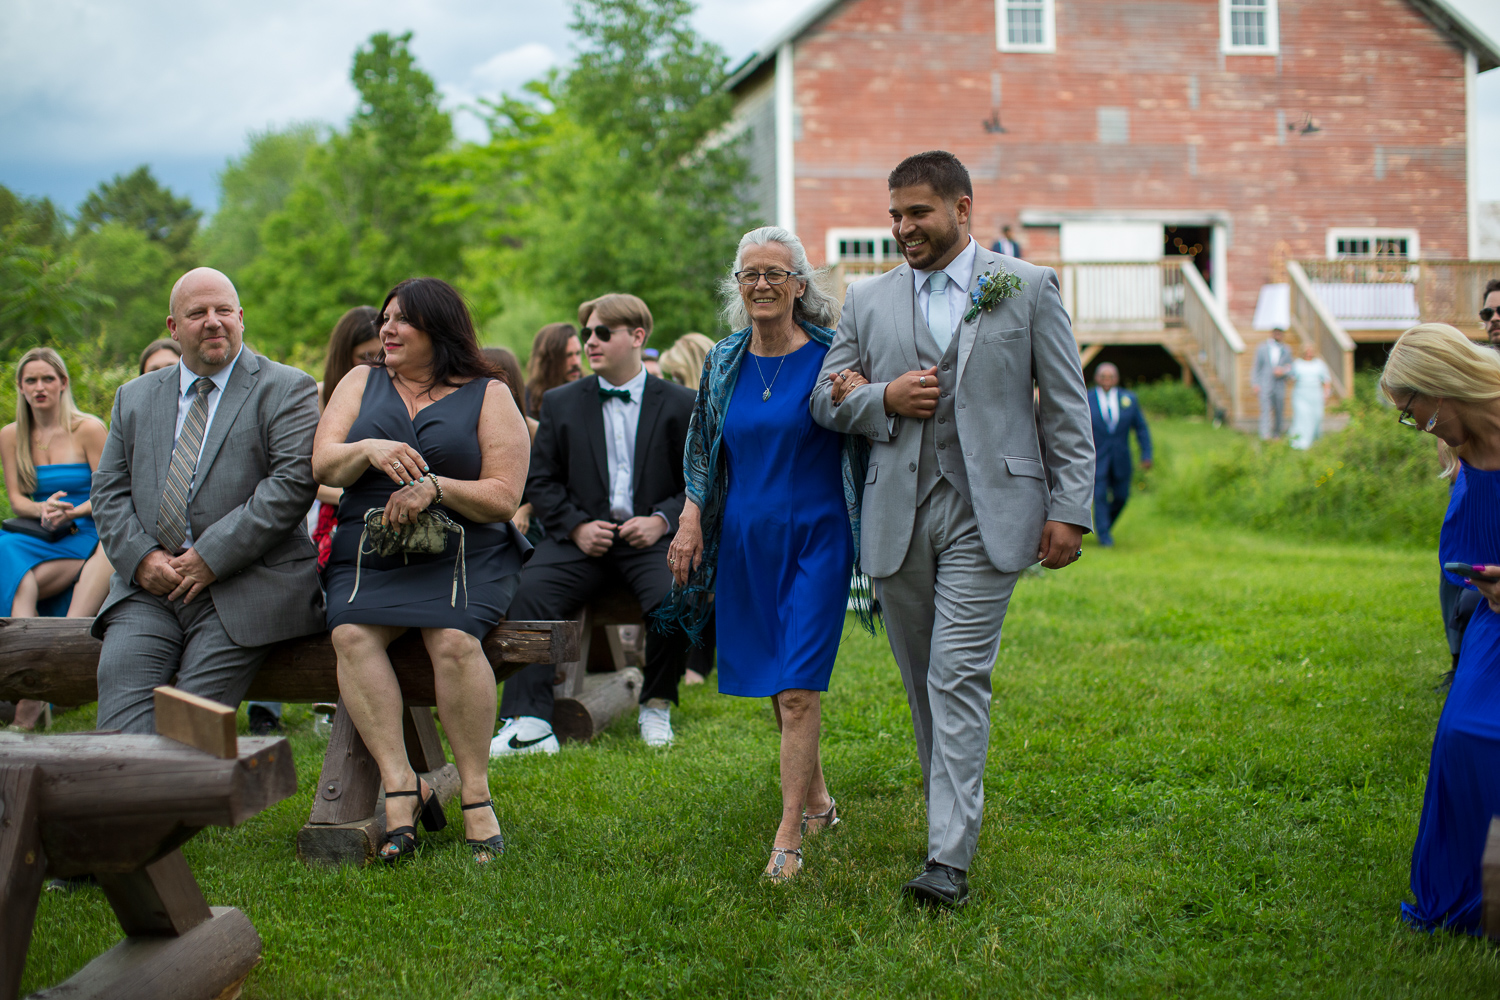 grandmother of the groom walking down the aisle escorted by groomsman at the perfect day